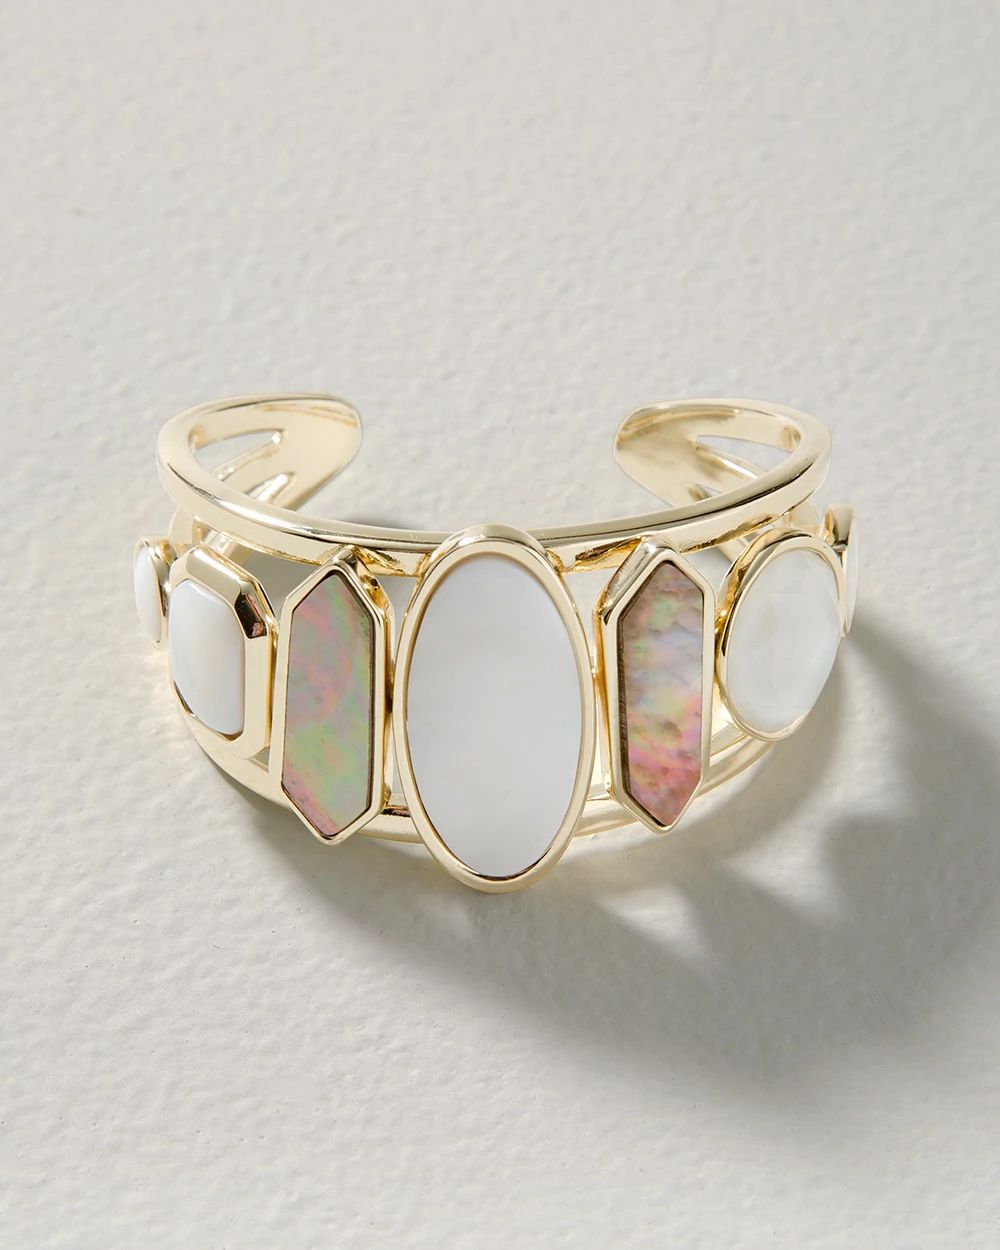 Mother of Pearl Shell Cuff click to view larger image.